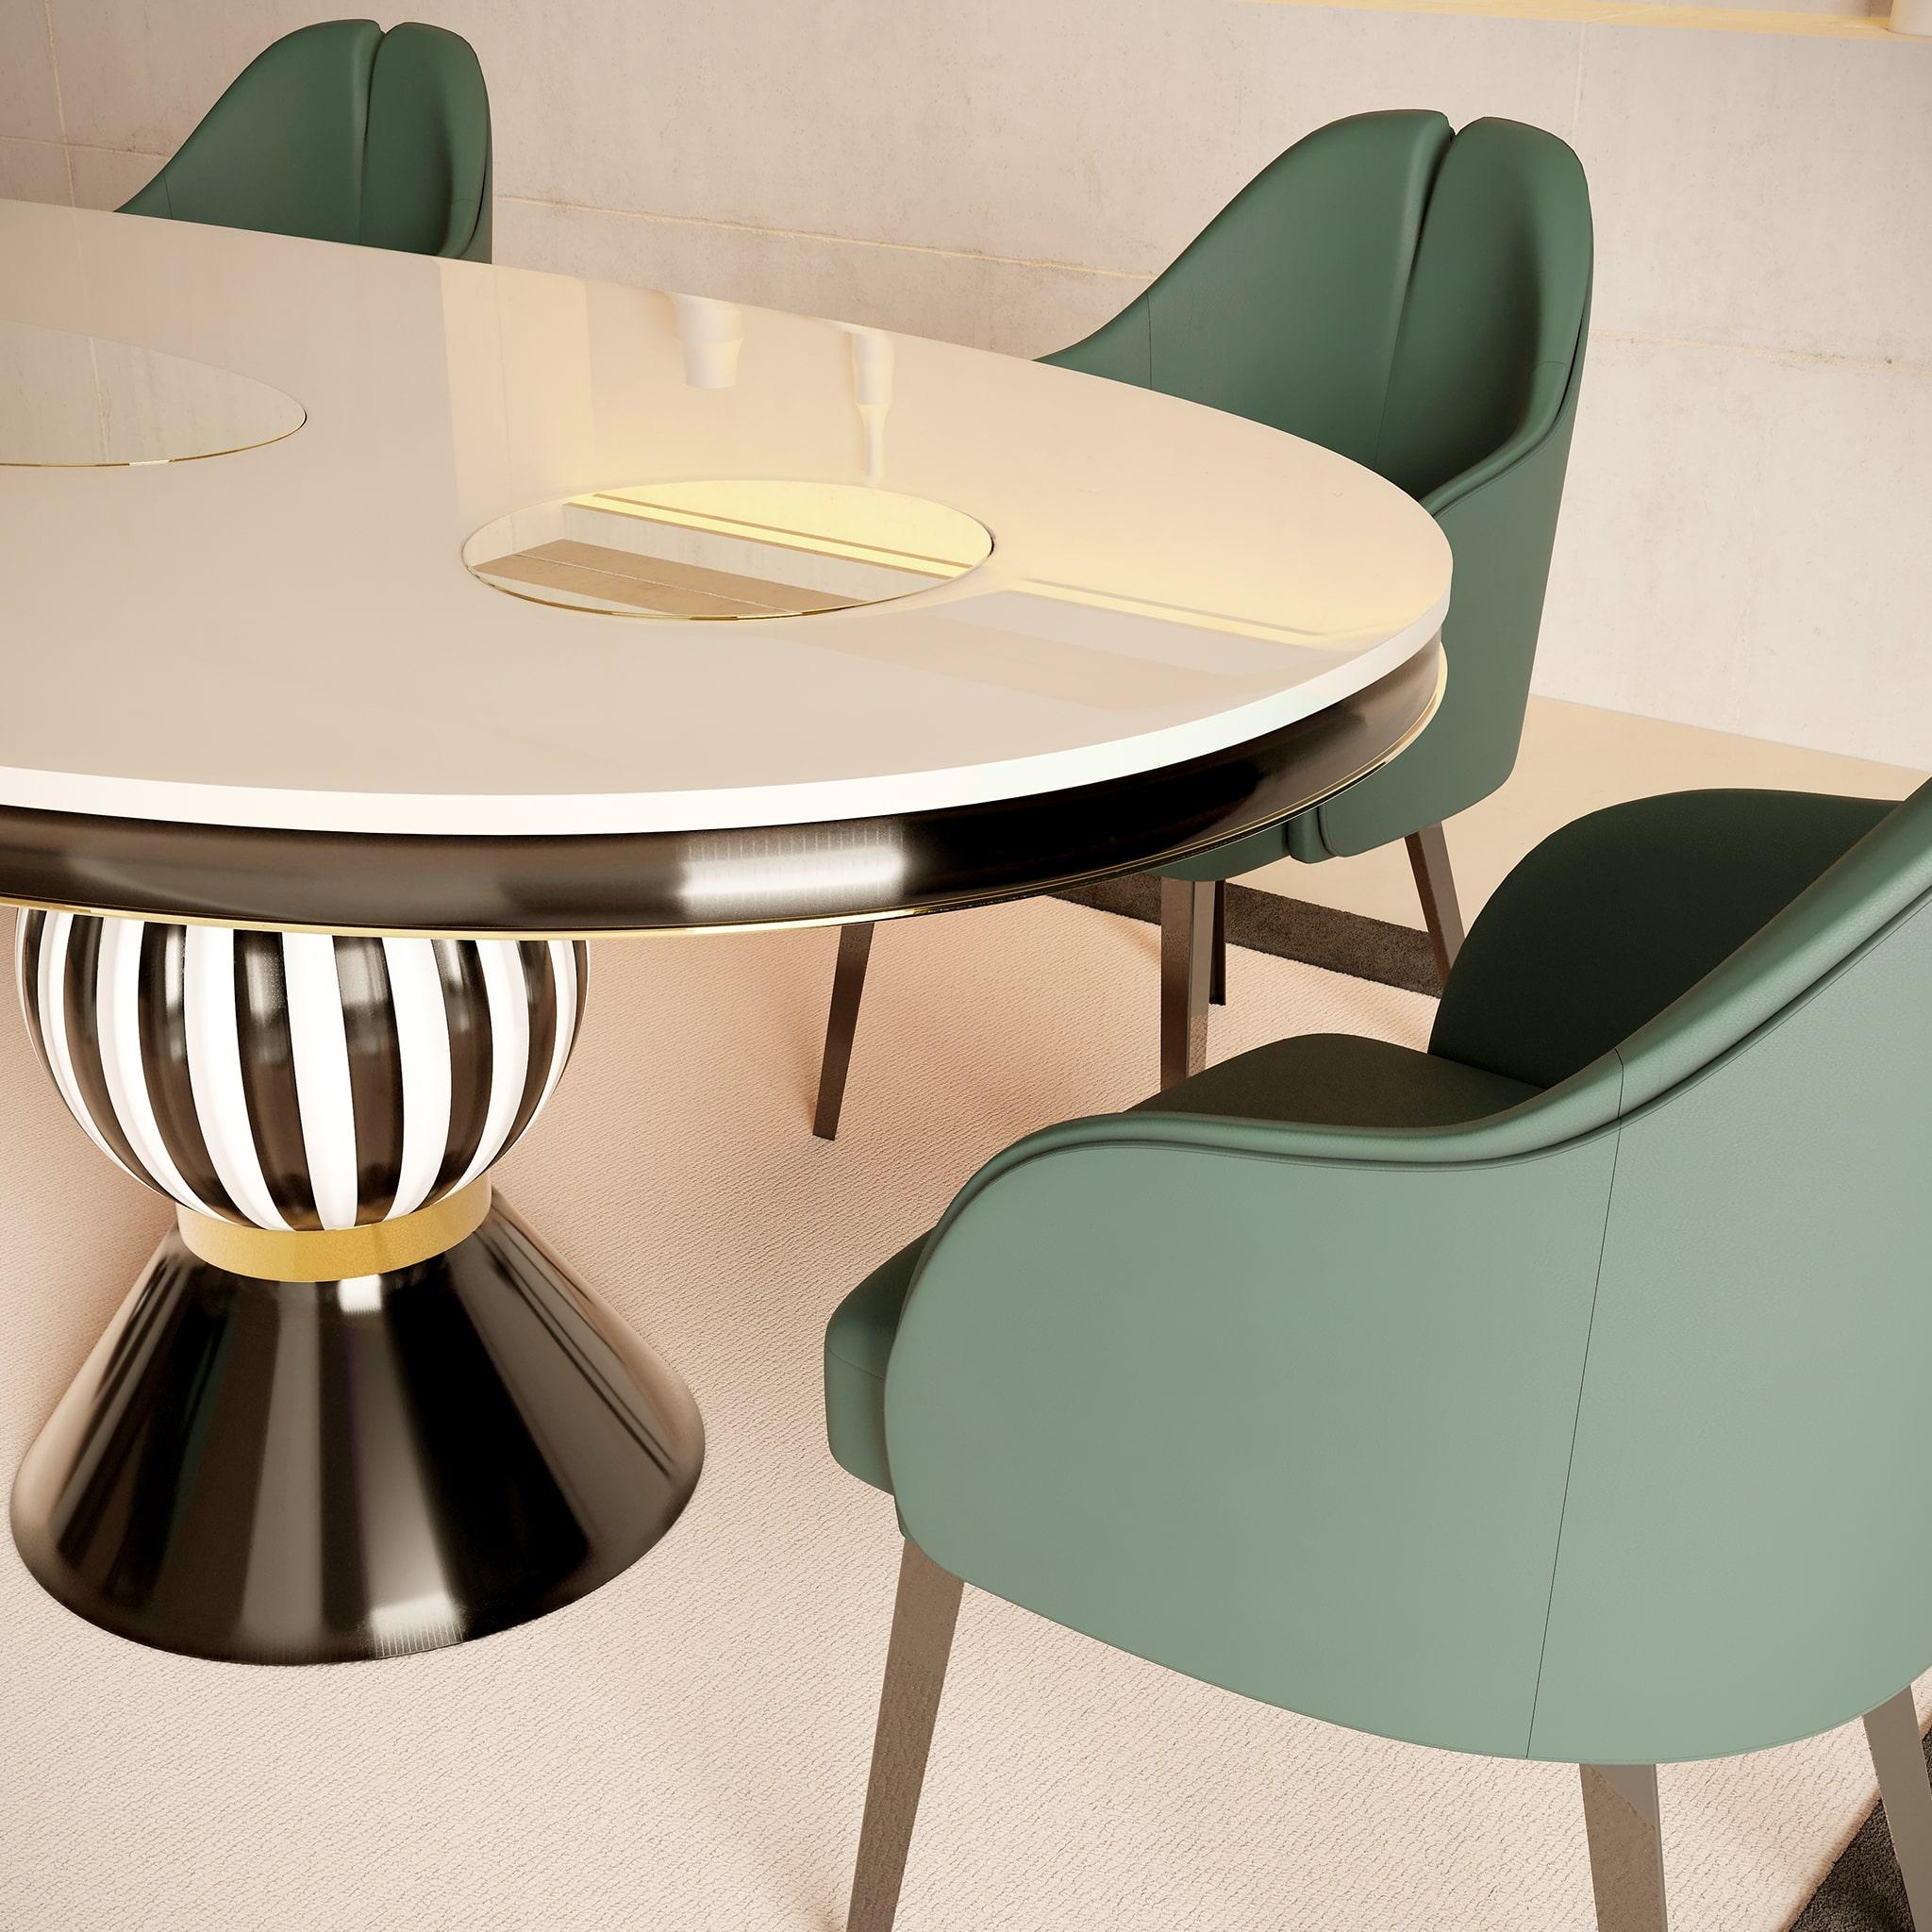 Contemporary Modern Oval Dining Table Black & White Top, Gold Stainless Steel Details For Sale